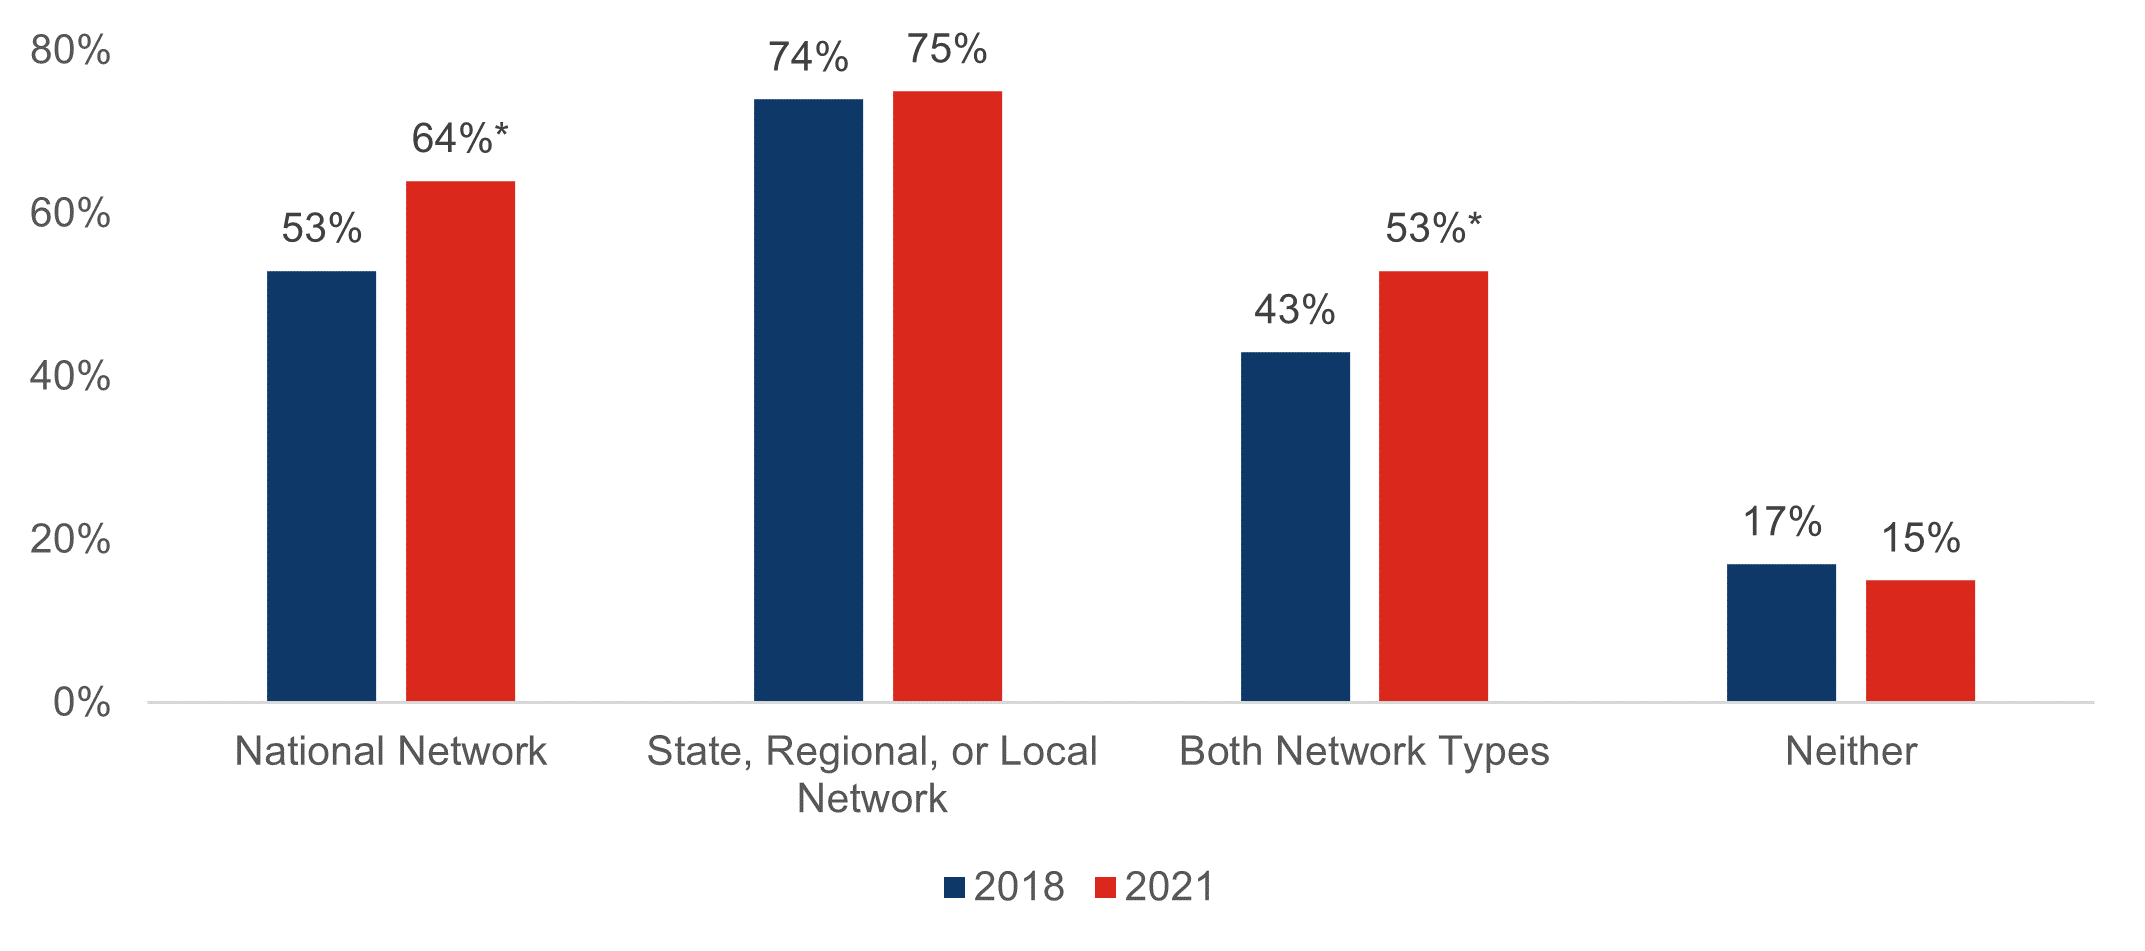 Figure 5 shows percent of hospitals that participated in national and state, regional, or local health information networks separately in 2018 and 2021. In 2018, 53%, 74%, 43%, and 17% of hospitals participated in national network, HIE, both networks, and neither network, respectively. In 2021, 64%, 75%, 53%, and 15% of hospitals participated in national network, HIE, both networks, and neither network, respectively.